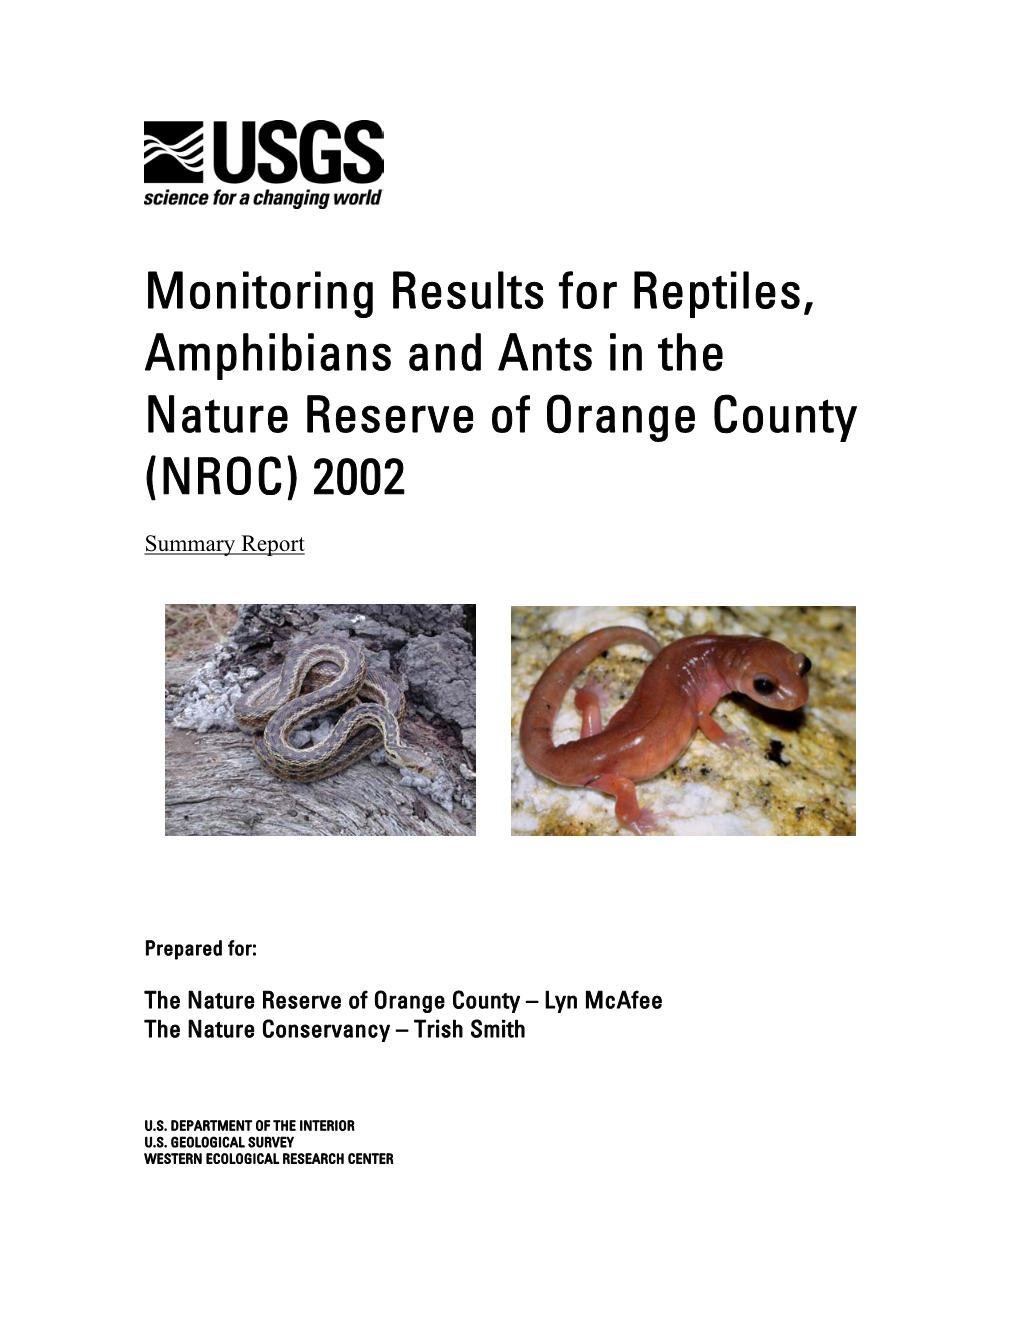 Monitoring Results for Reptiles, Amphibians and Ants in the Nature Reserve of Orange County (NROC) 2002